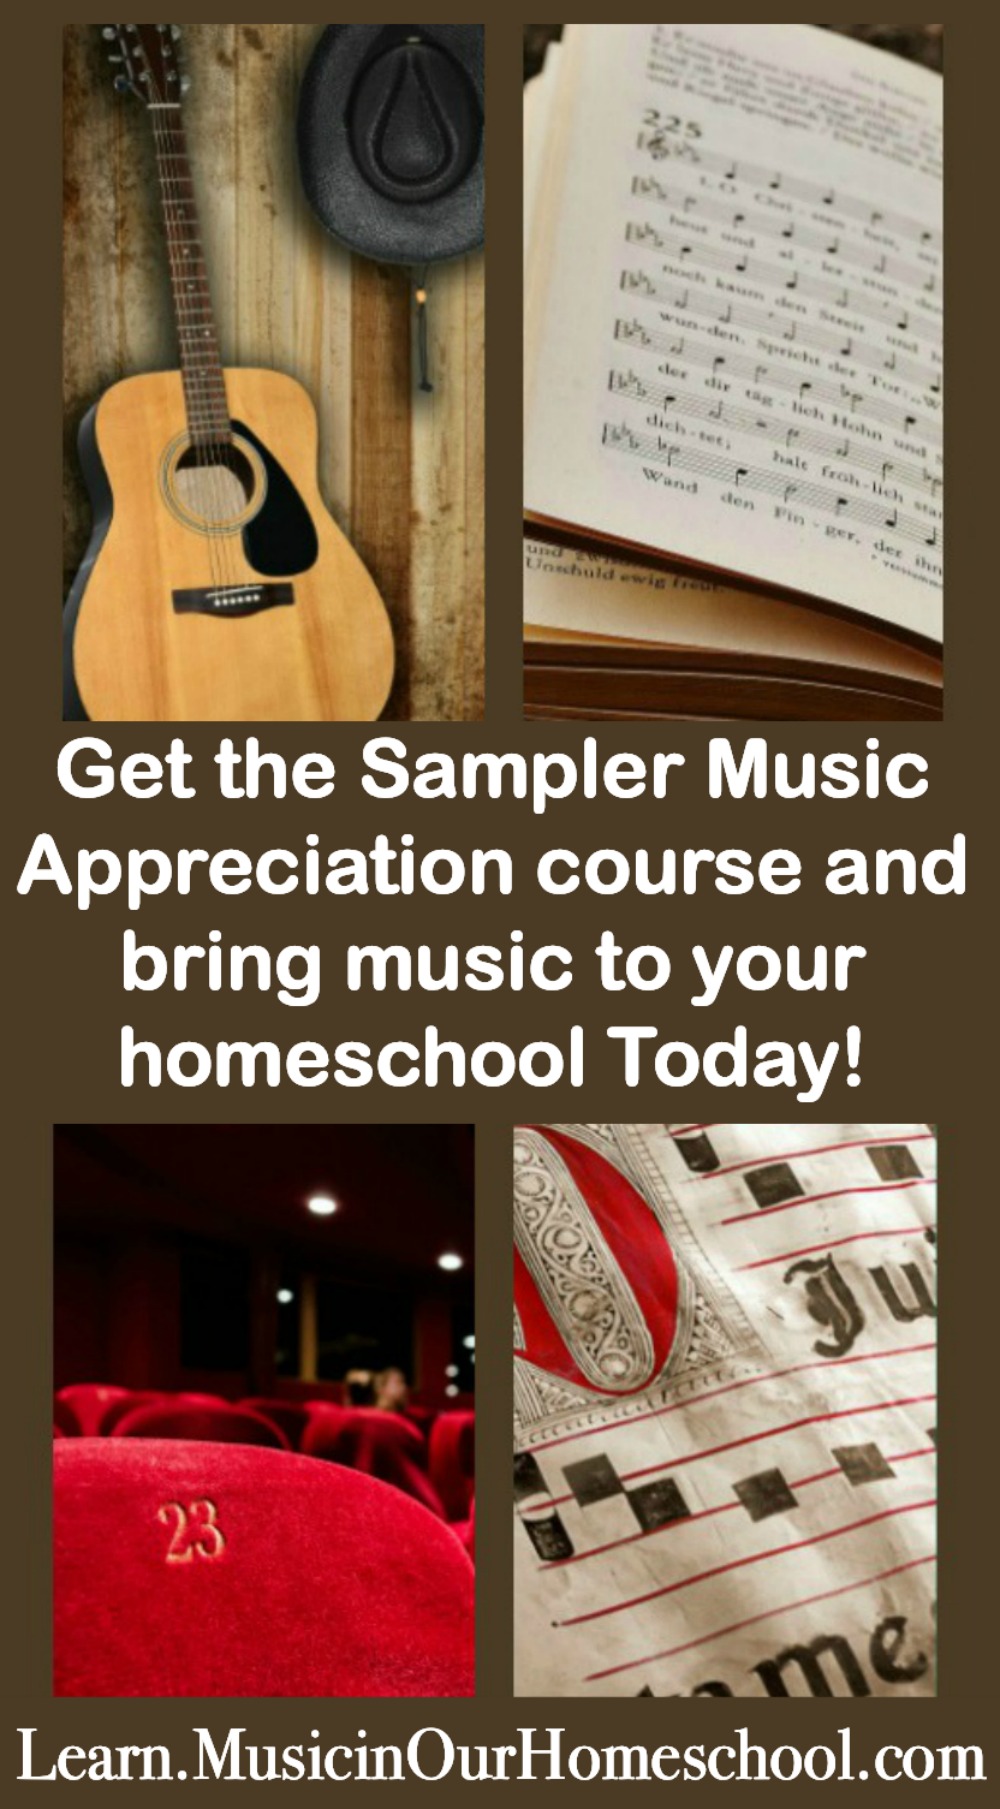 The Sampler Music Appreciation online course gives you a taste of many of the different course lessons available at Learn.MusicinOurHomeschool.com. #music #onlinemusic #homeschoolmusic #musicinourhomeschool